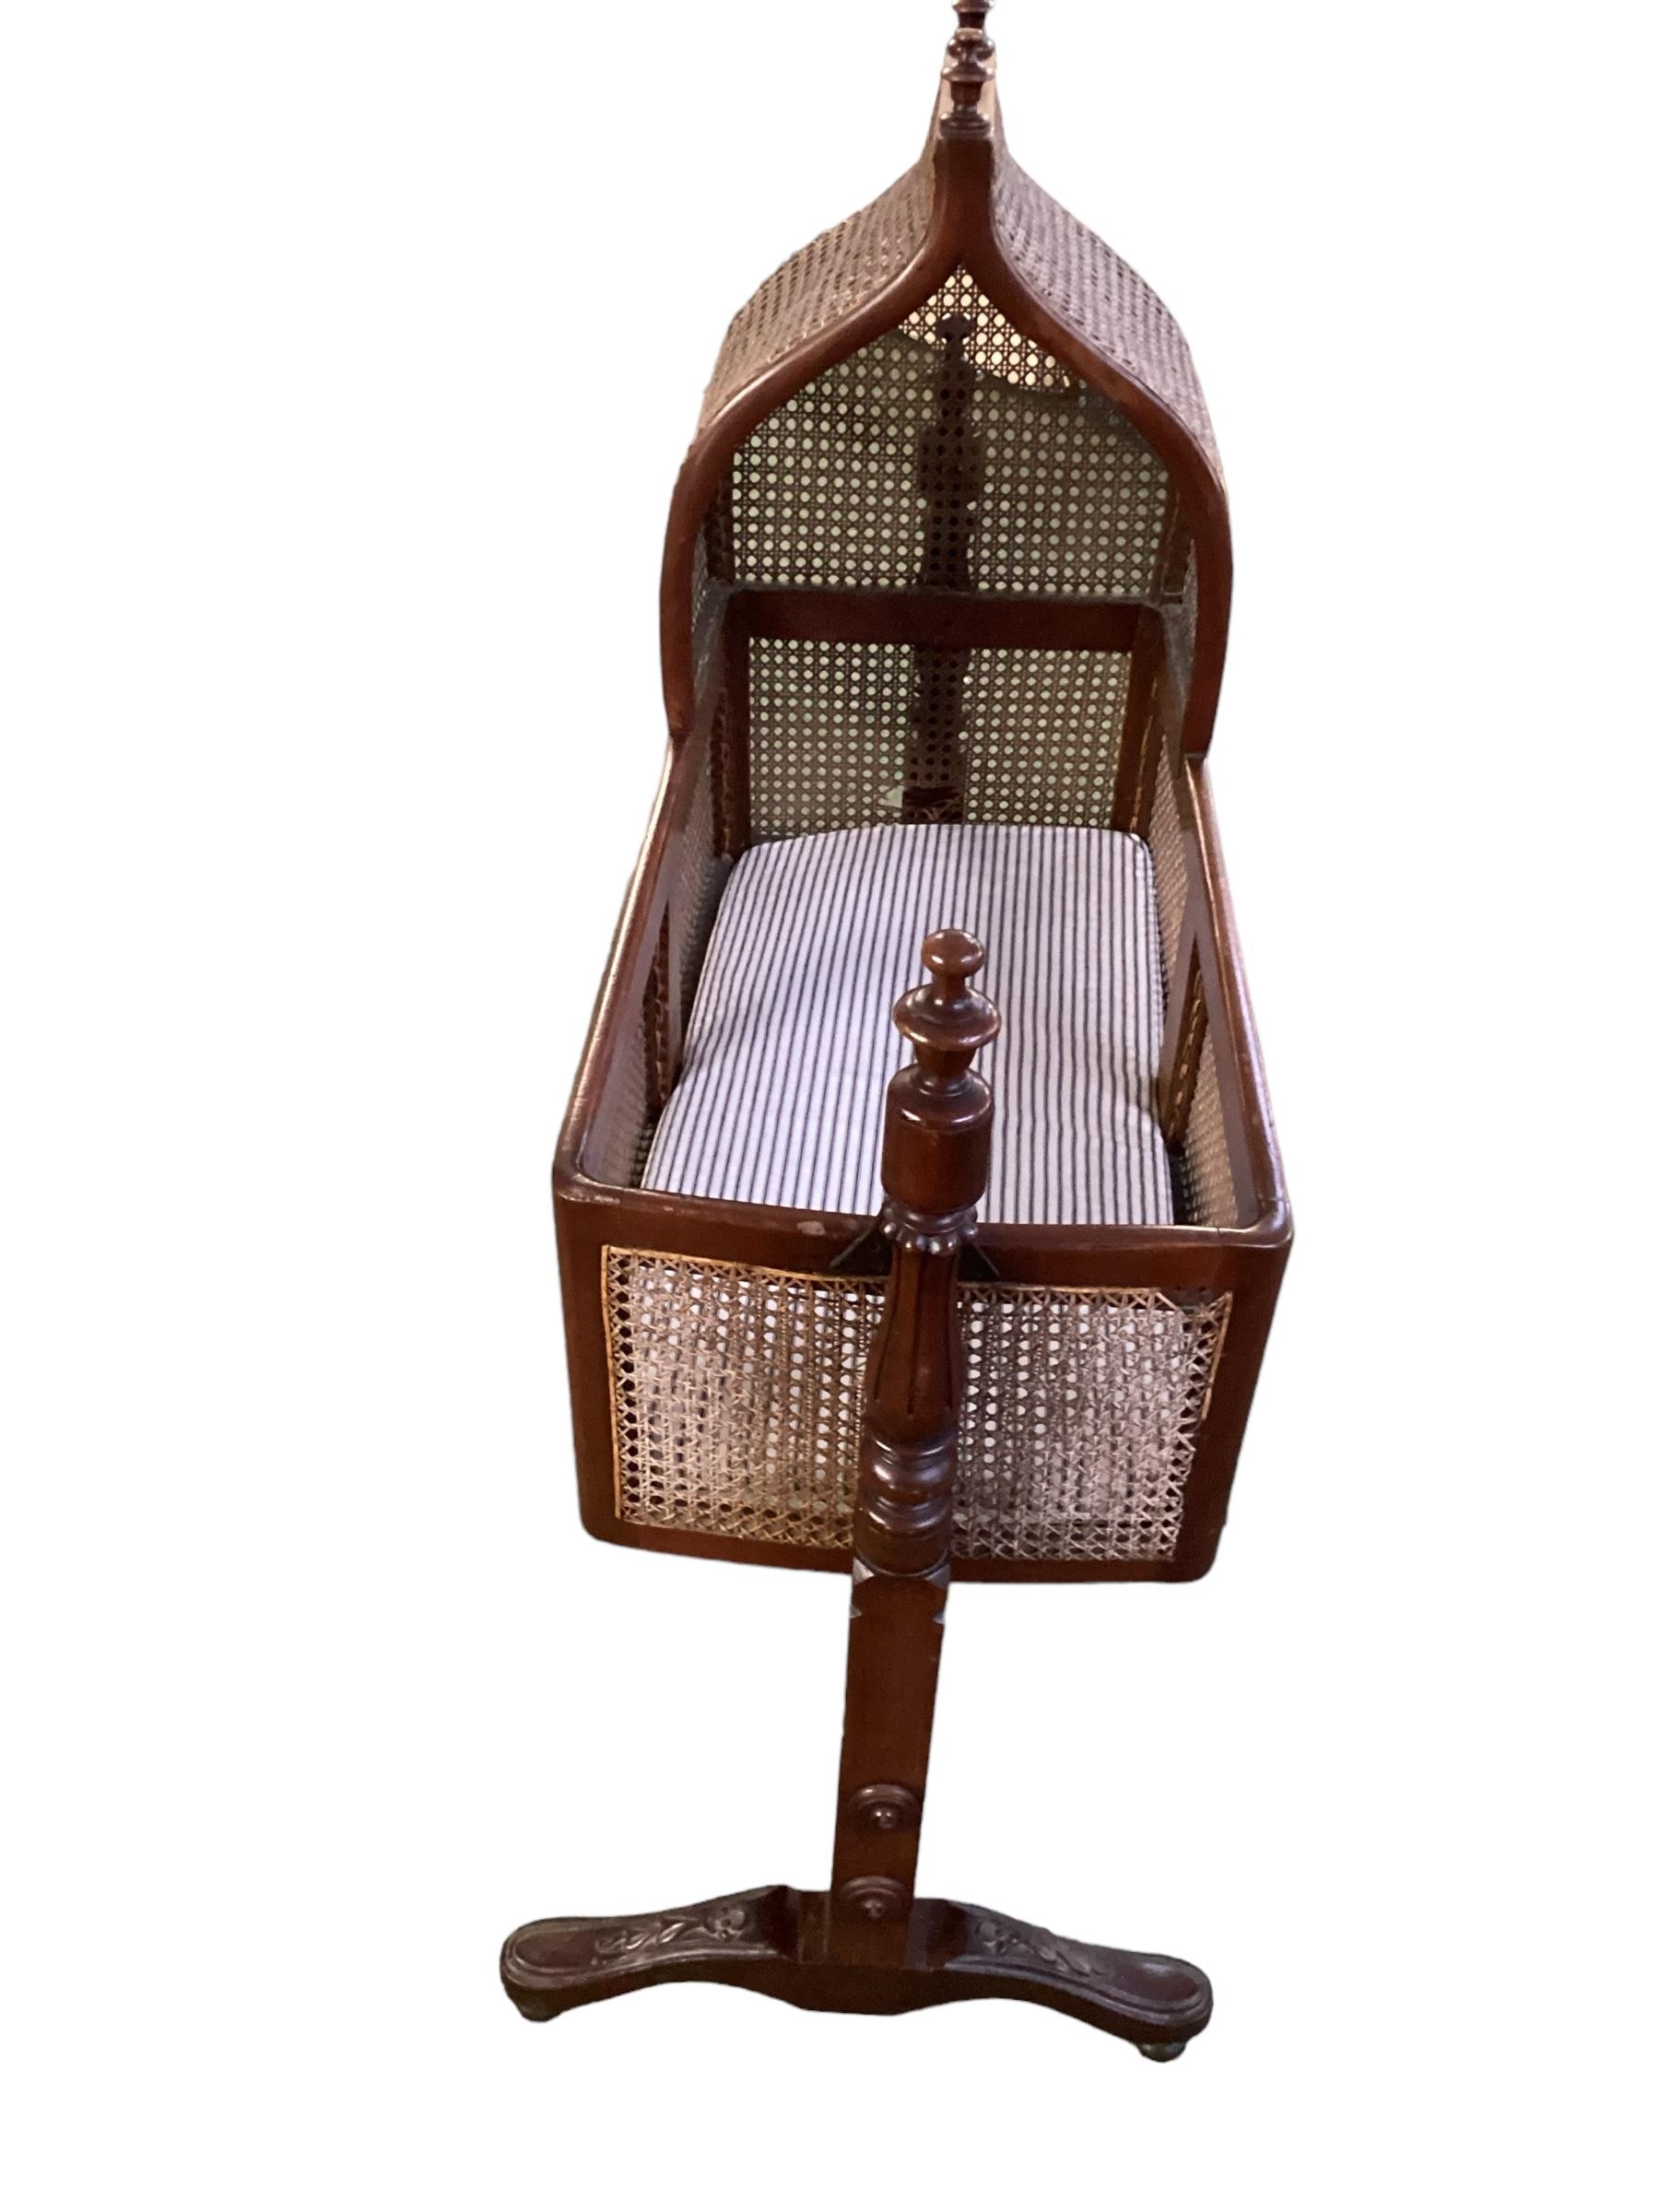 Victorian mahogany Crib on stand, some wear to bergere at one end - Image 3 of 3